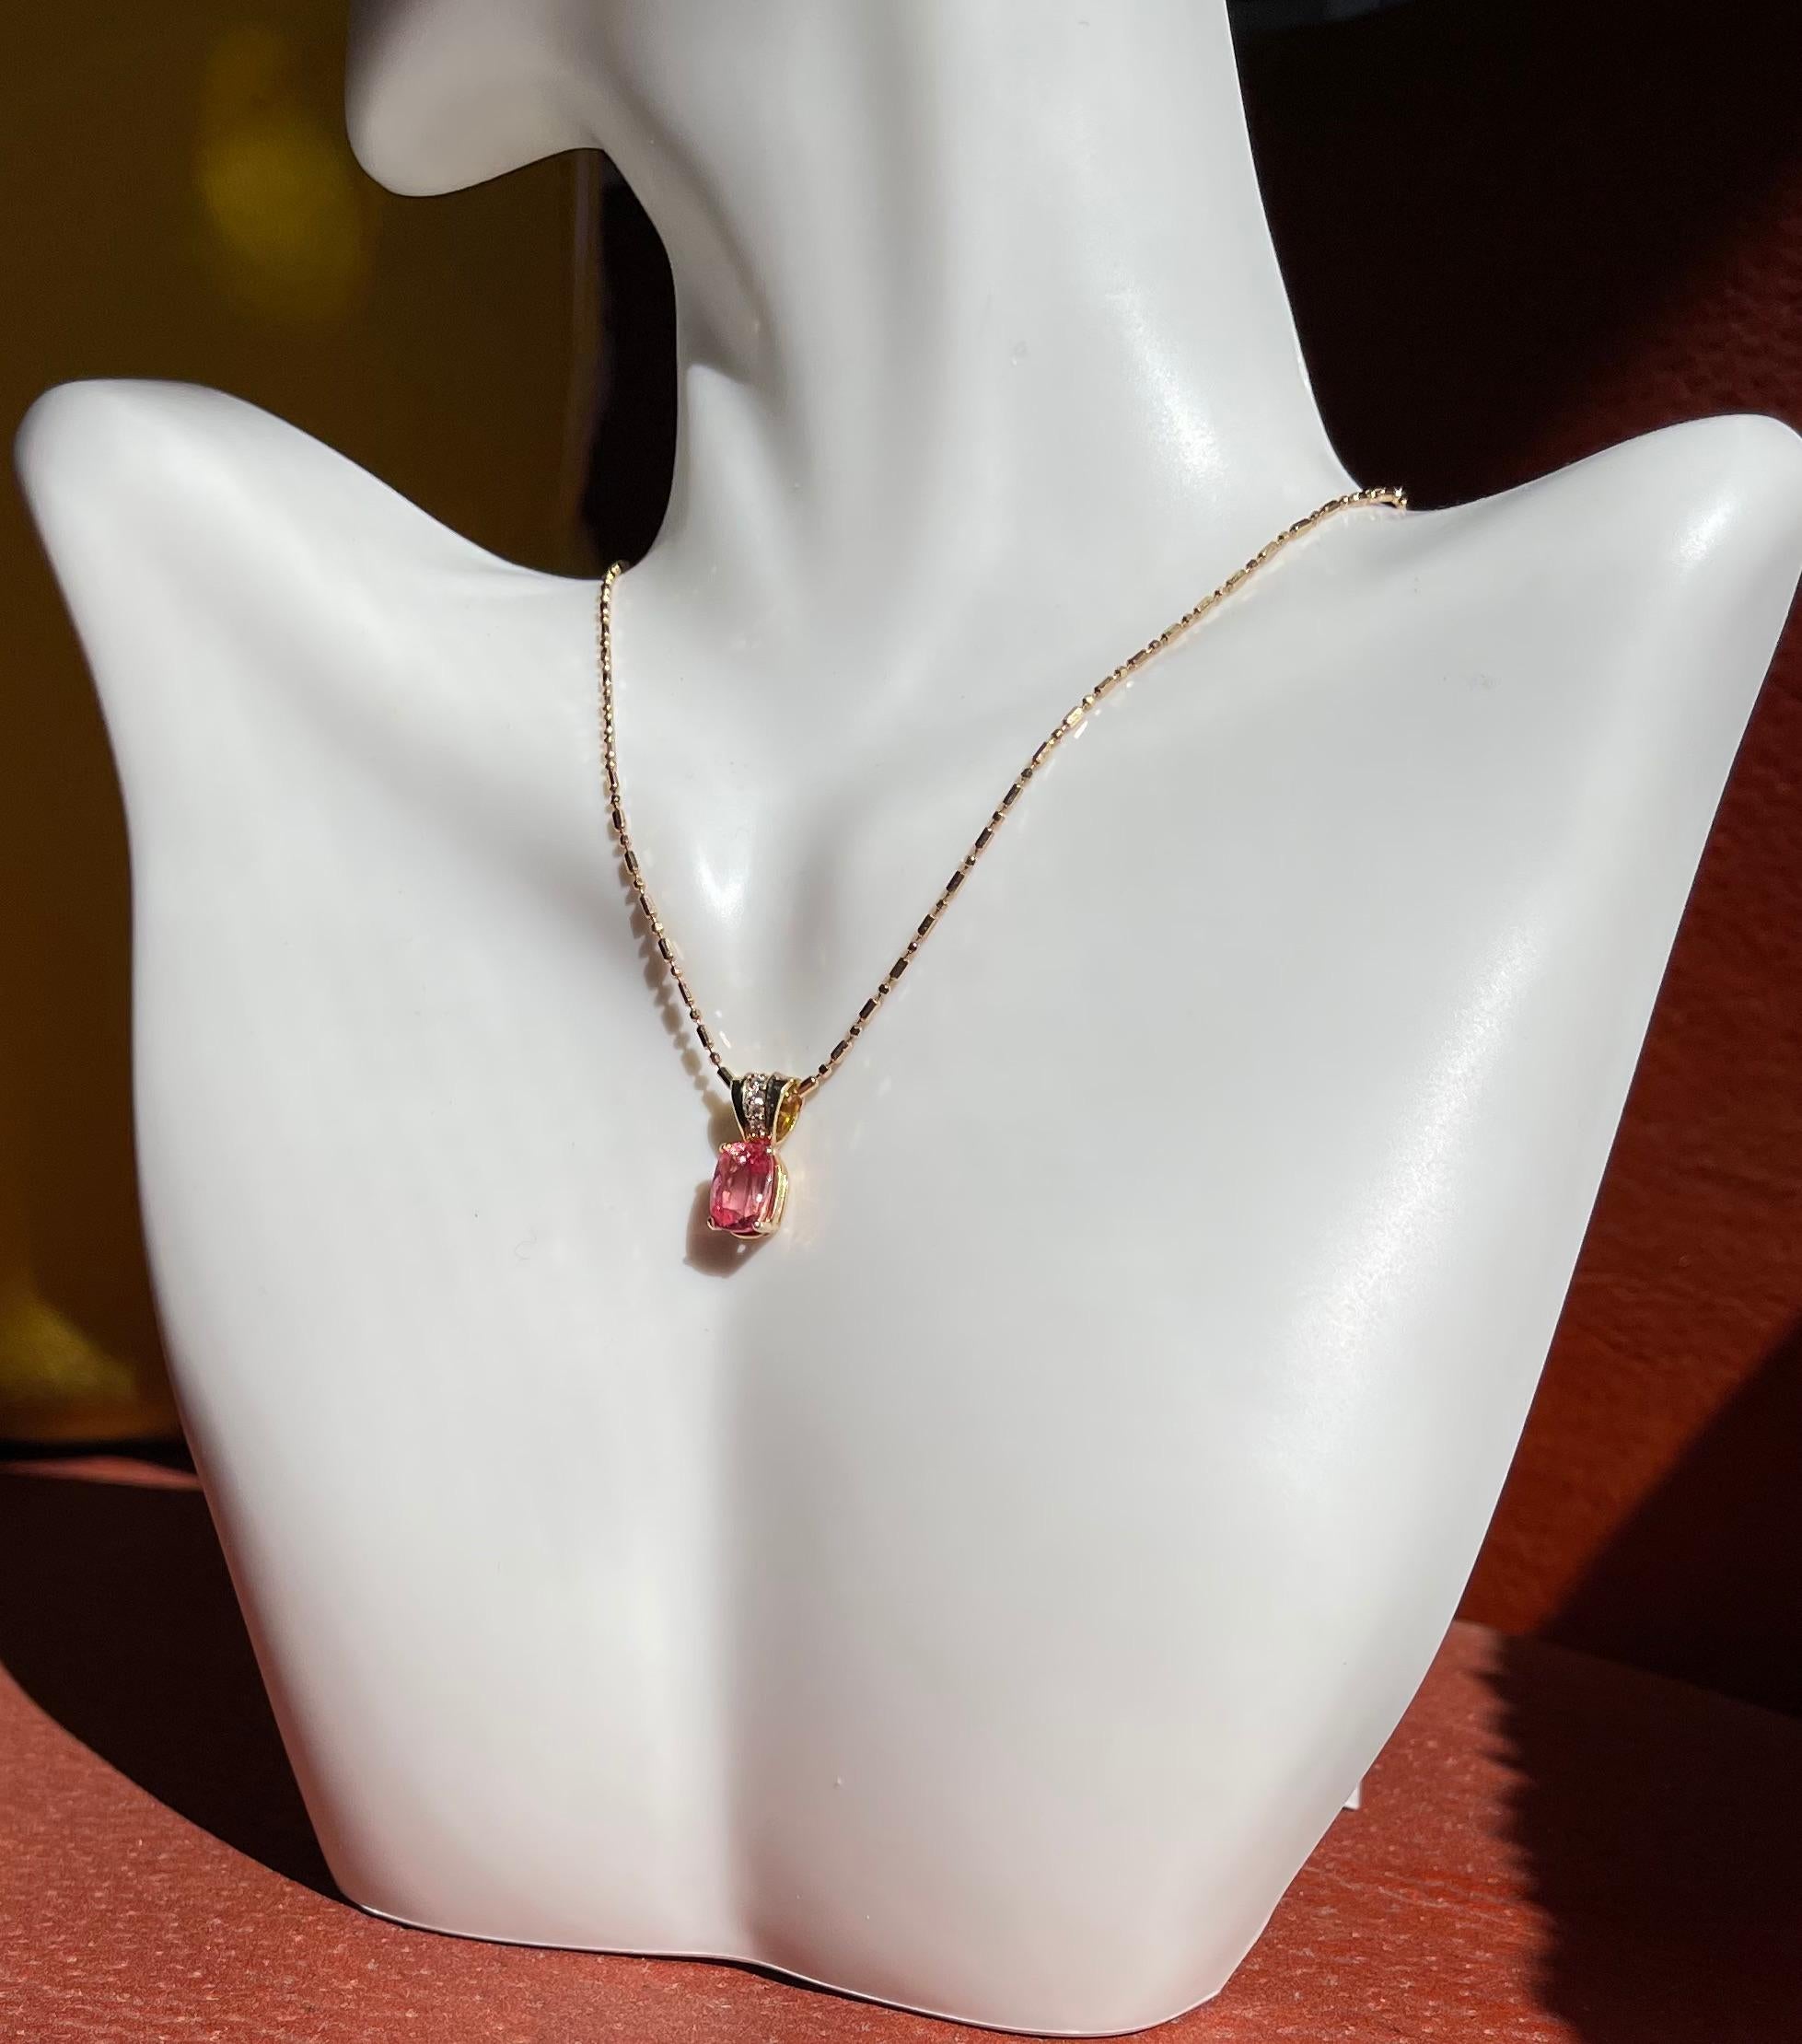 Colorado is known for having one of the finest gem grade Rhodochrosite mines and is the location of this faceted 1.65 carats oval stone. We set this unusually clean stone in a 14-karat yellow gold pendant. The bale of the pendant is accented with 4